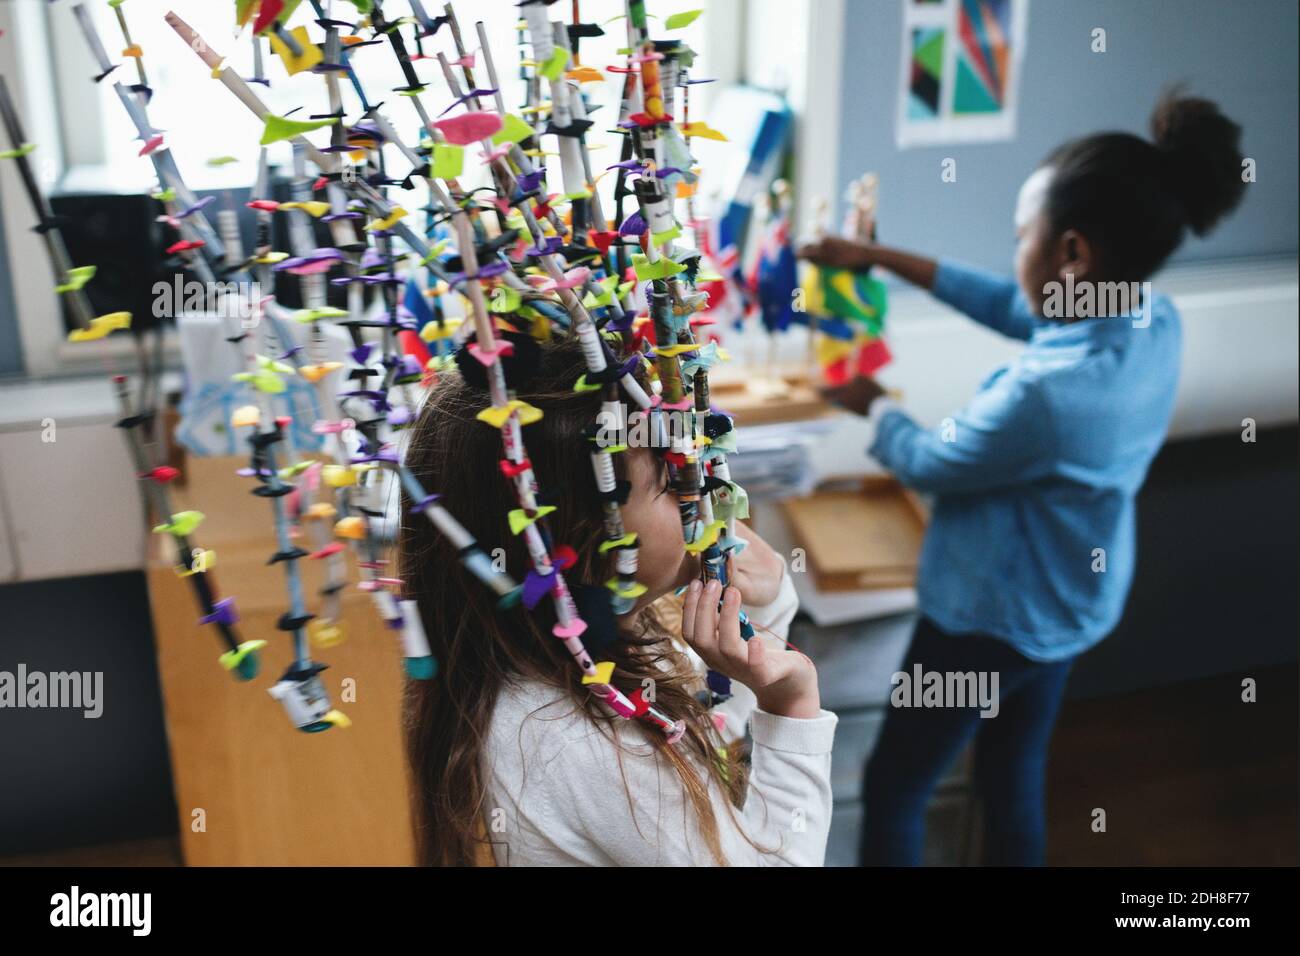 Girl playing with decoration while friend looking at flags in classroom Stock Photo